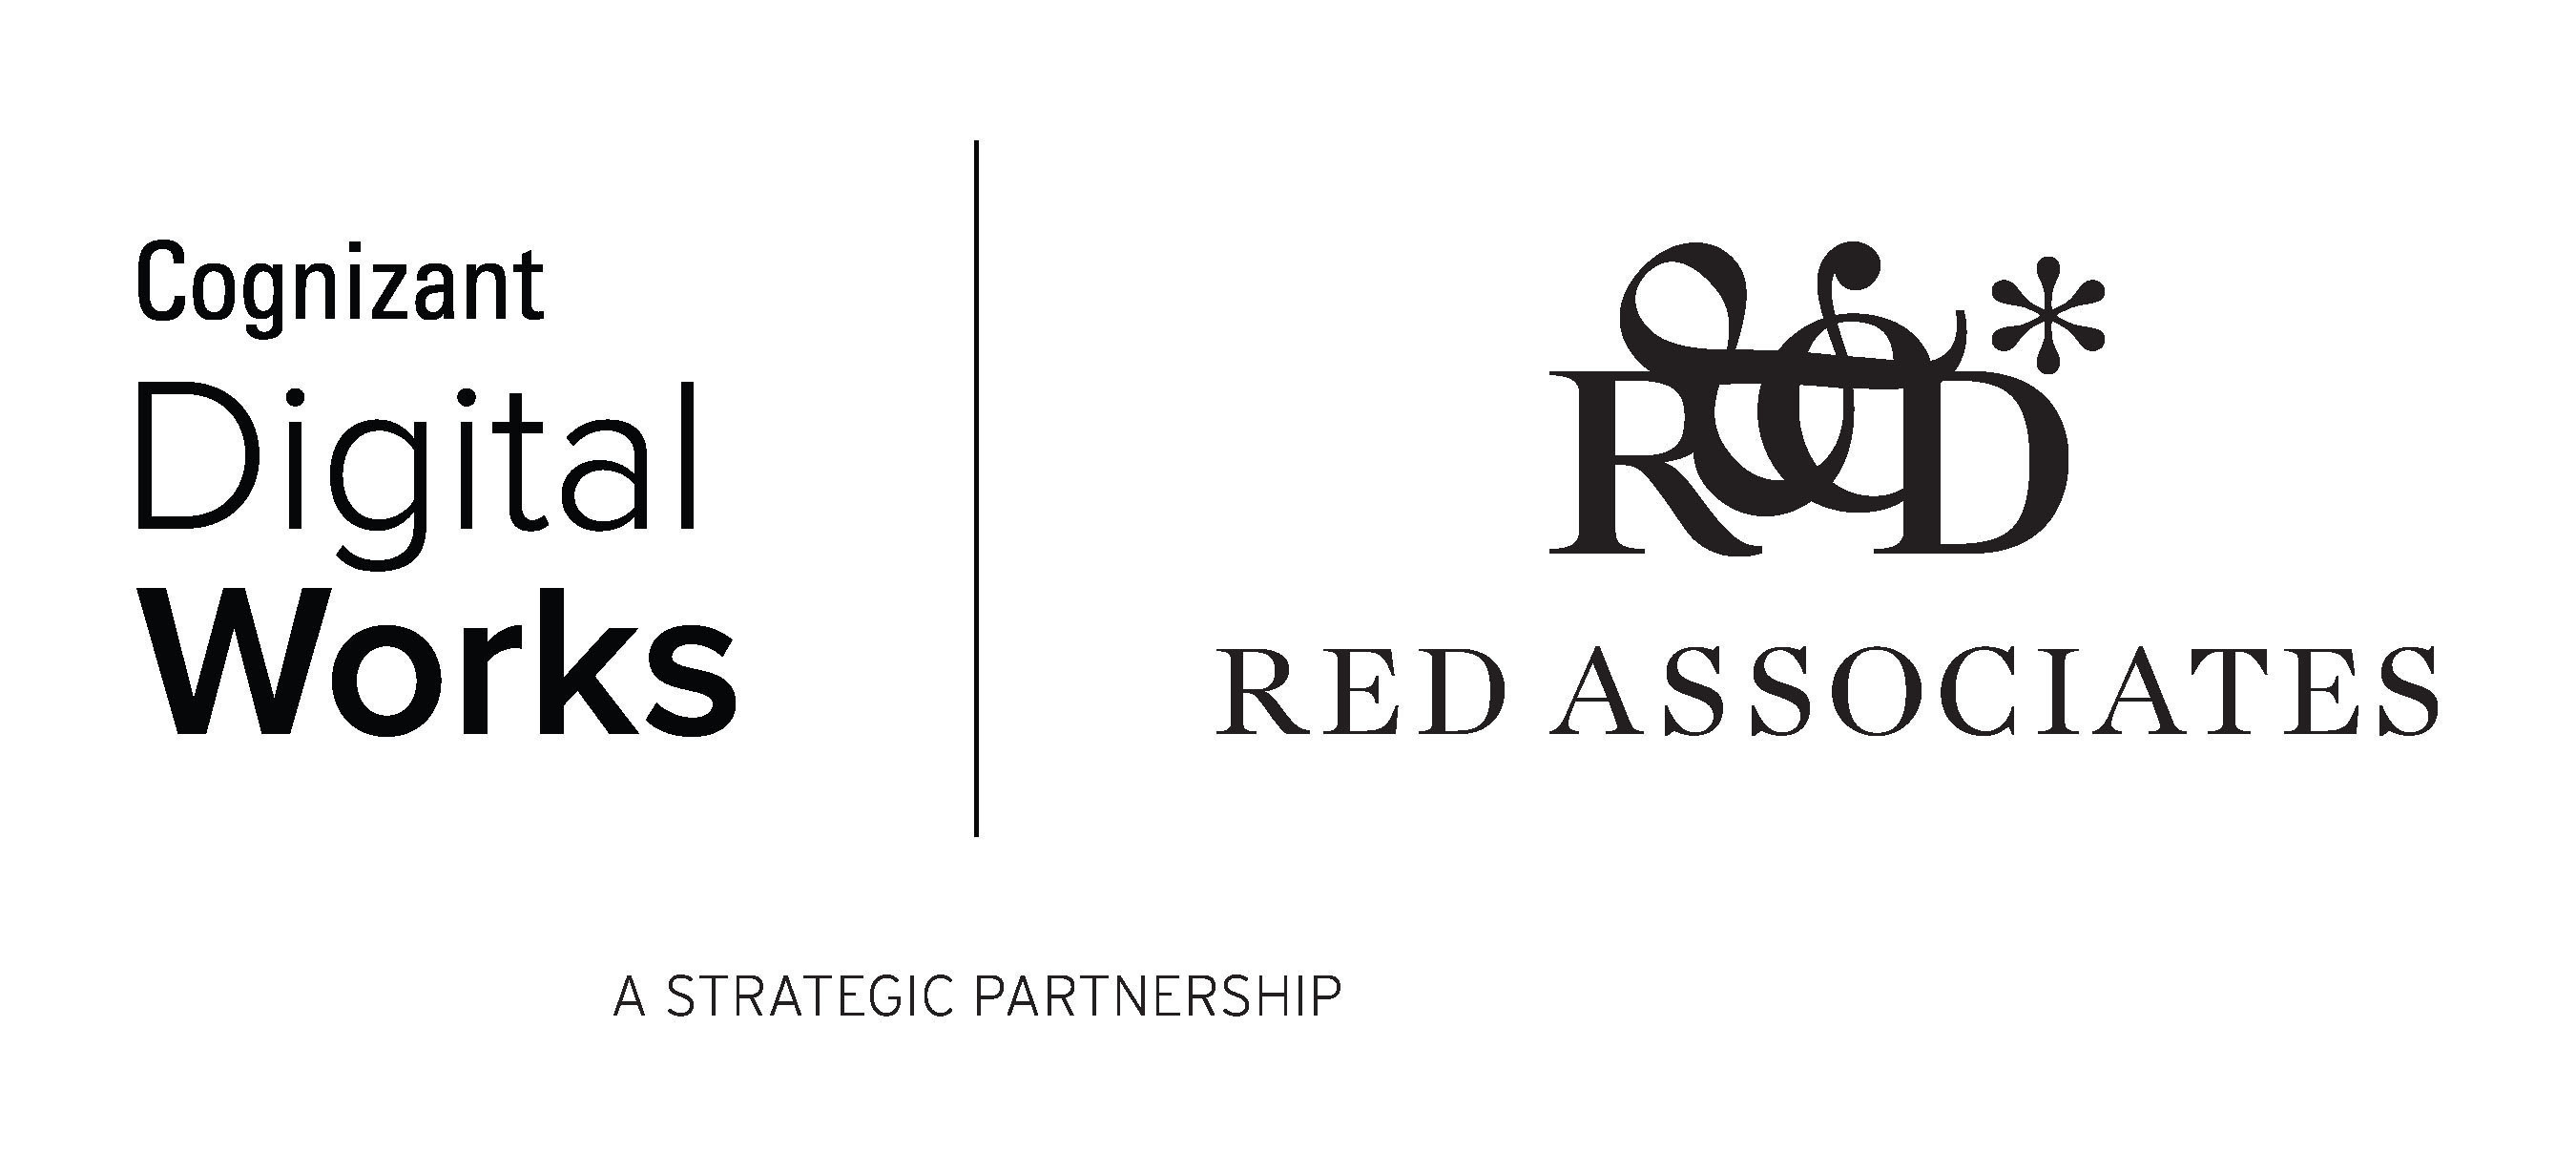 Cognizant announces an exclusive strategic partnership and the acquisition of an ownership interest of 49 percent in ReD Associates, a leading strategic consulting firm specializing in the use of human sciences to help business leaders better understand customer behavior.